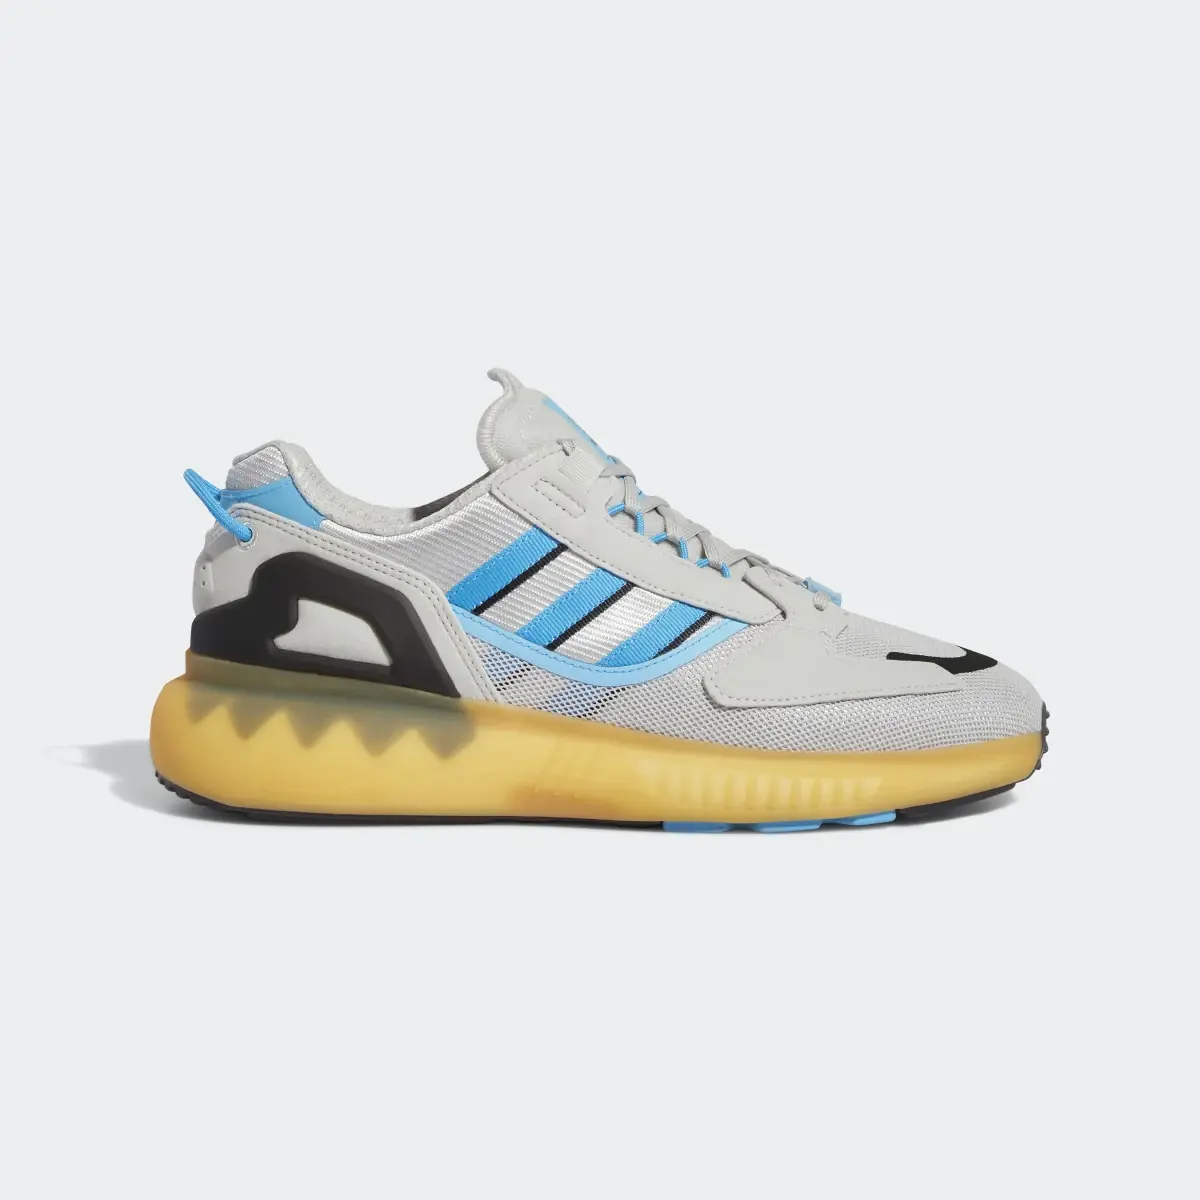 Adidas ZX 5K Boost Shoes. 2